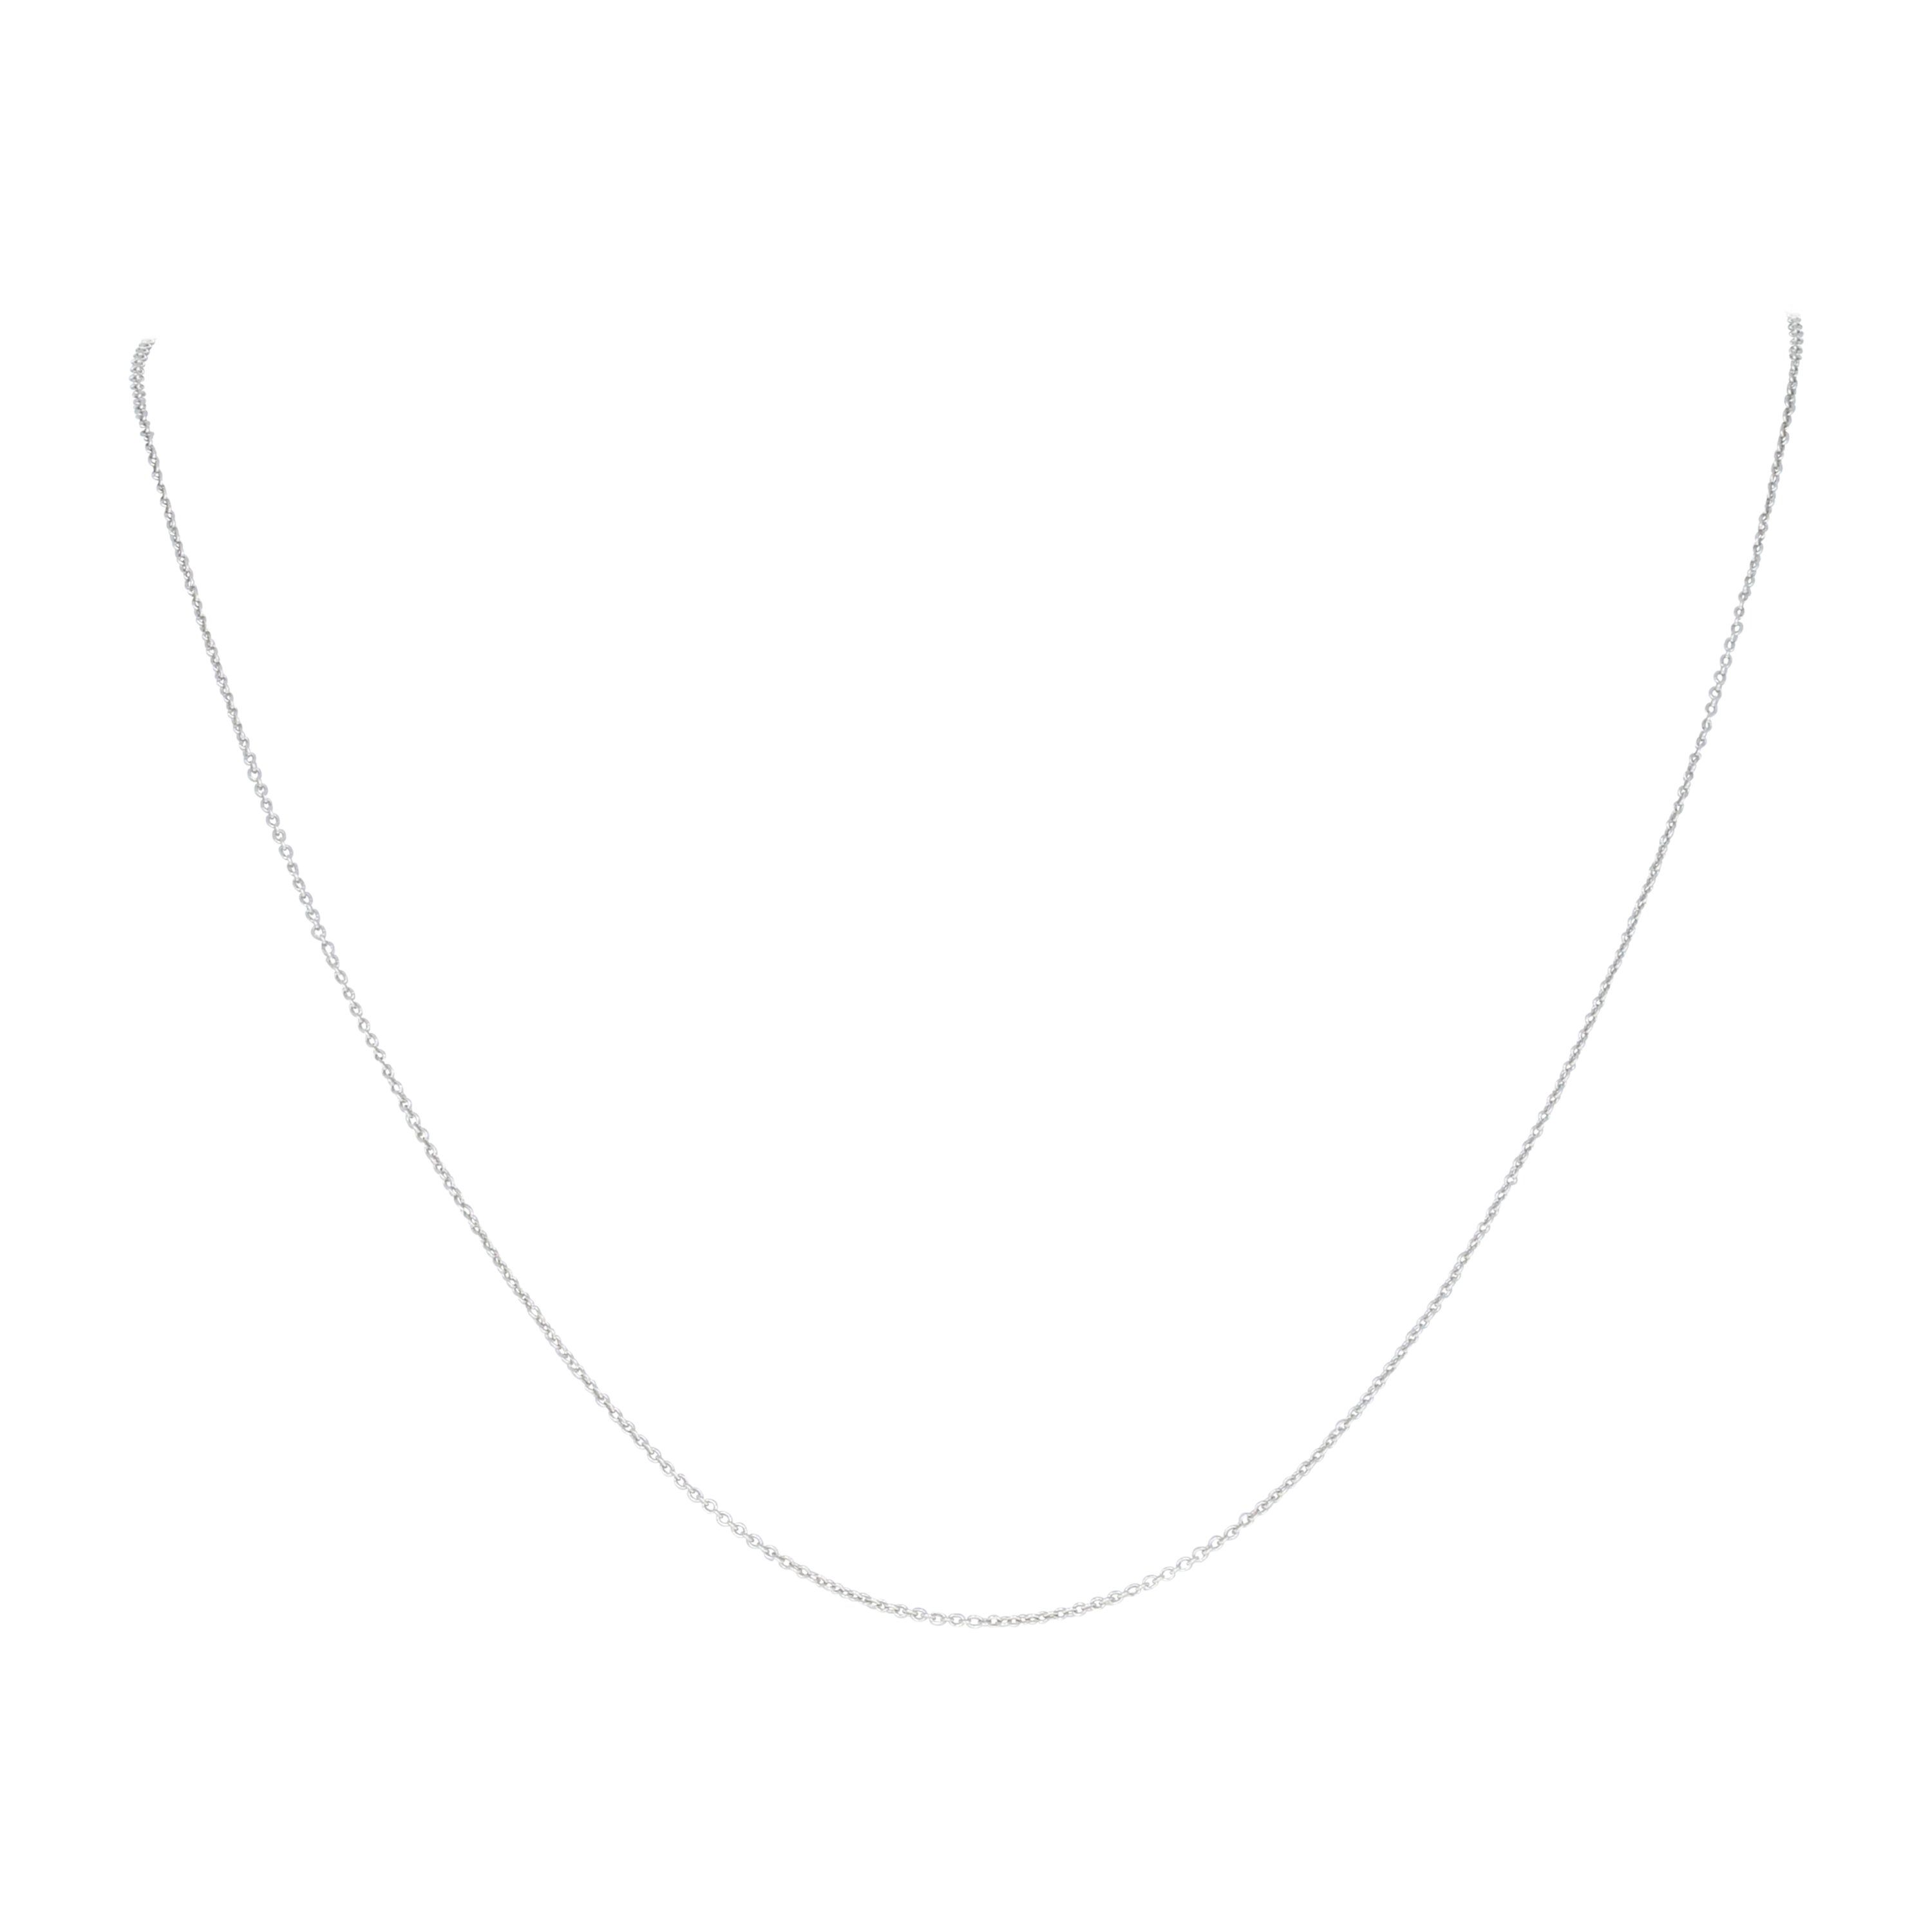 White Gold Cable Chain Necklace - 14k Adjustable Length